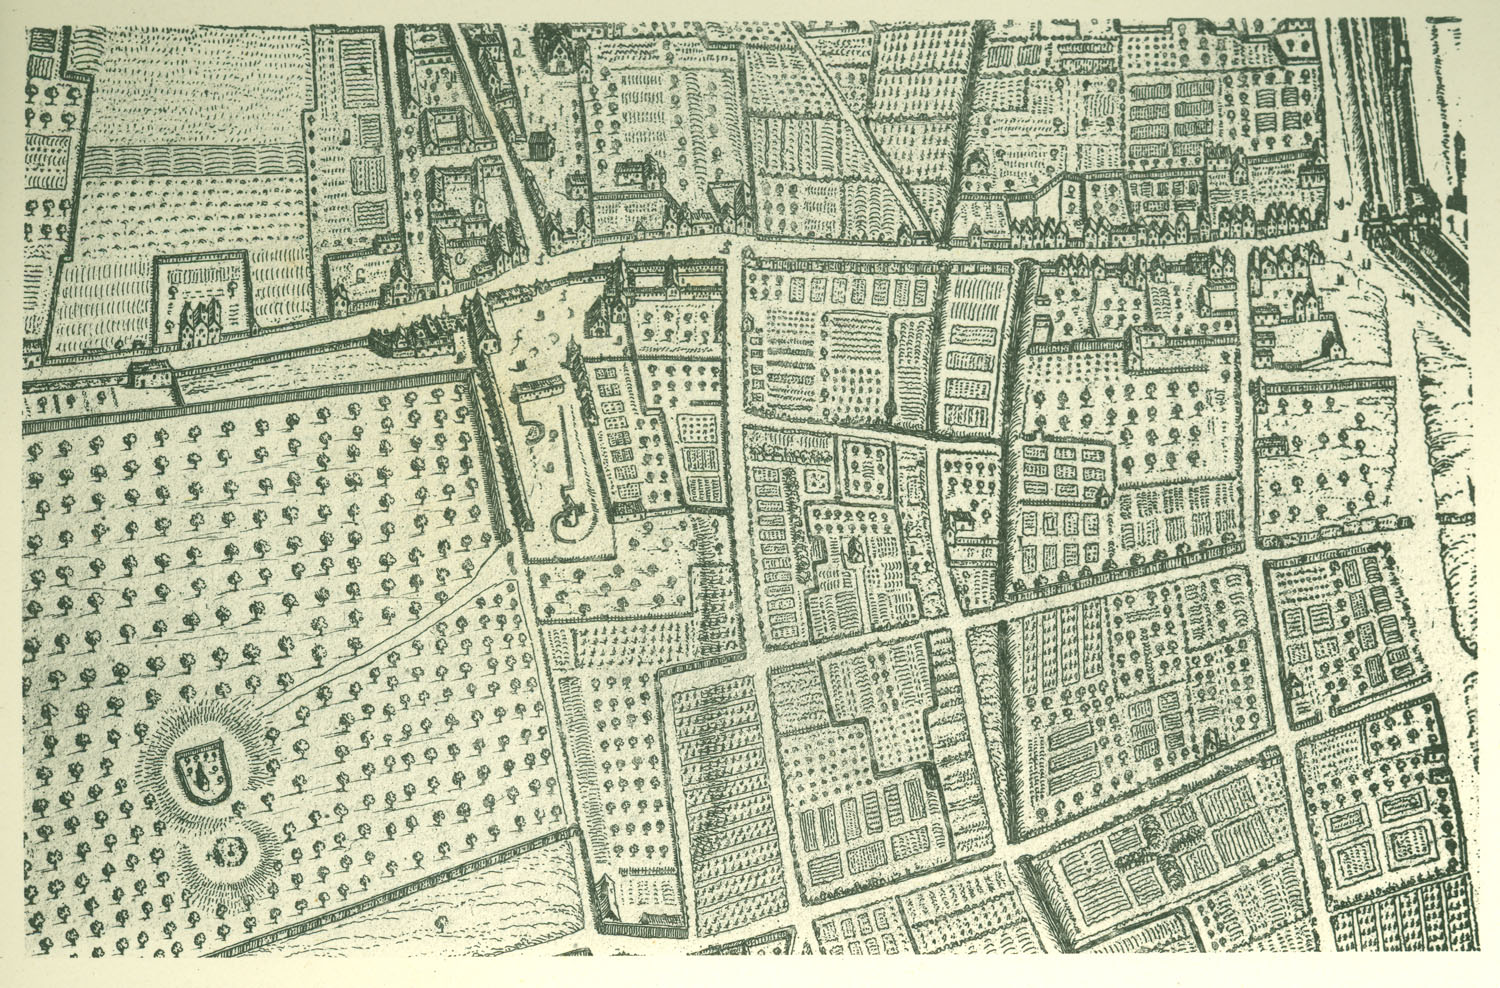 Fragment of a map of Paris 